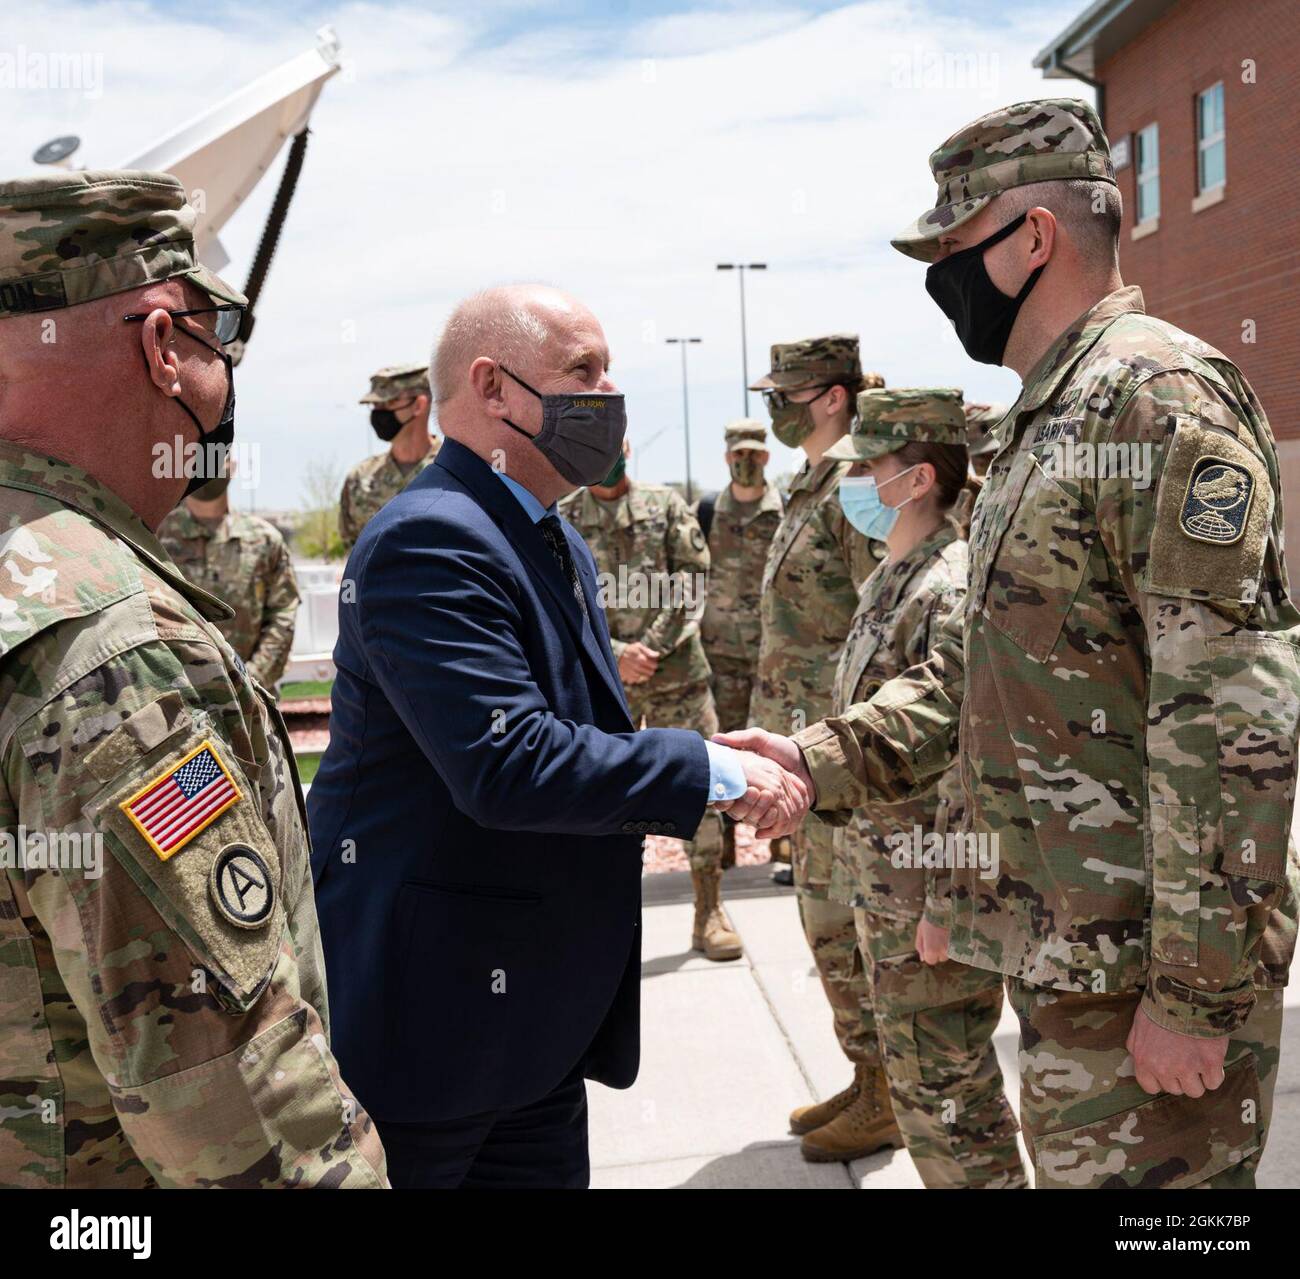 Acting Secretary of the Army, Hon. John E. Whitley presents Master Sgt. Derrick Holmes a challenge coin for his hard work and leadership at 100th Missile Defense Brigade at Fort Carson, Colo., May 13, 2021. Stock Photo